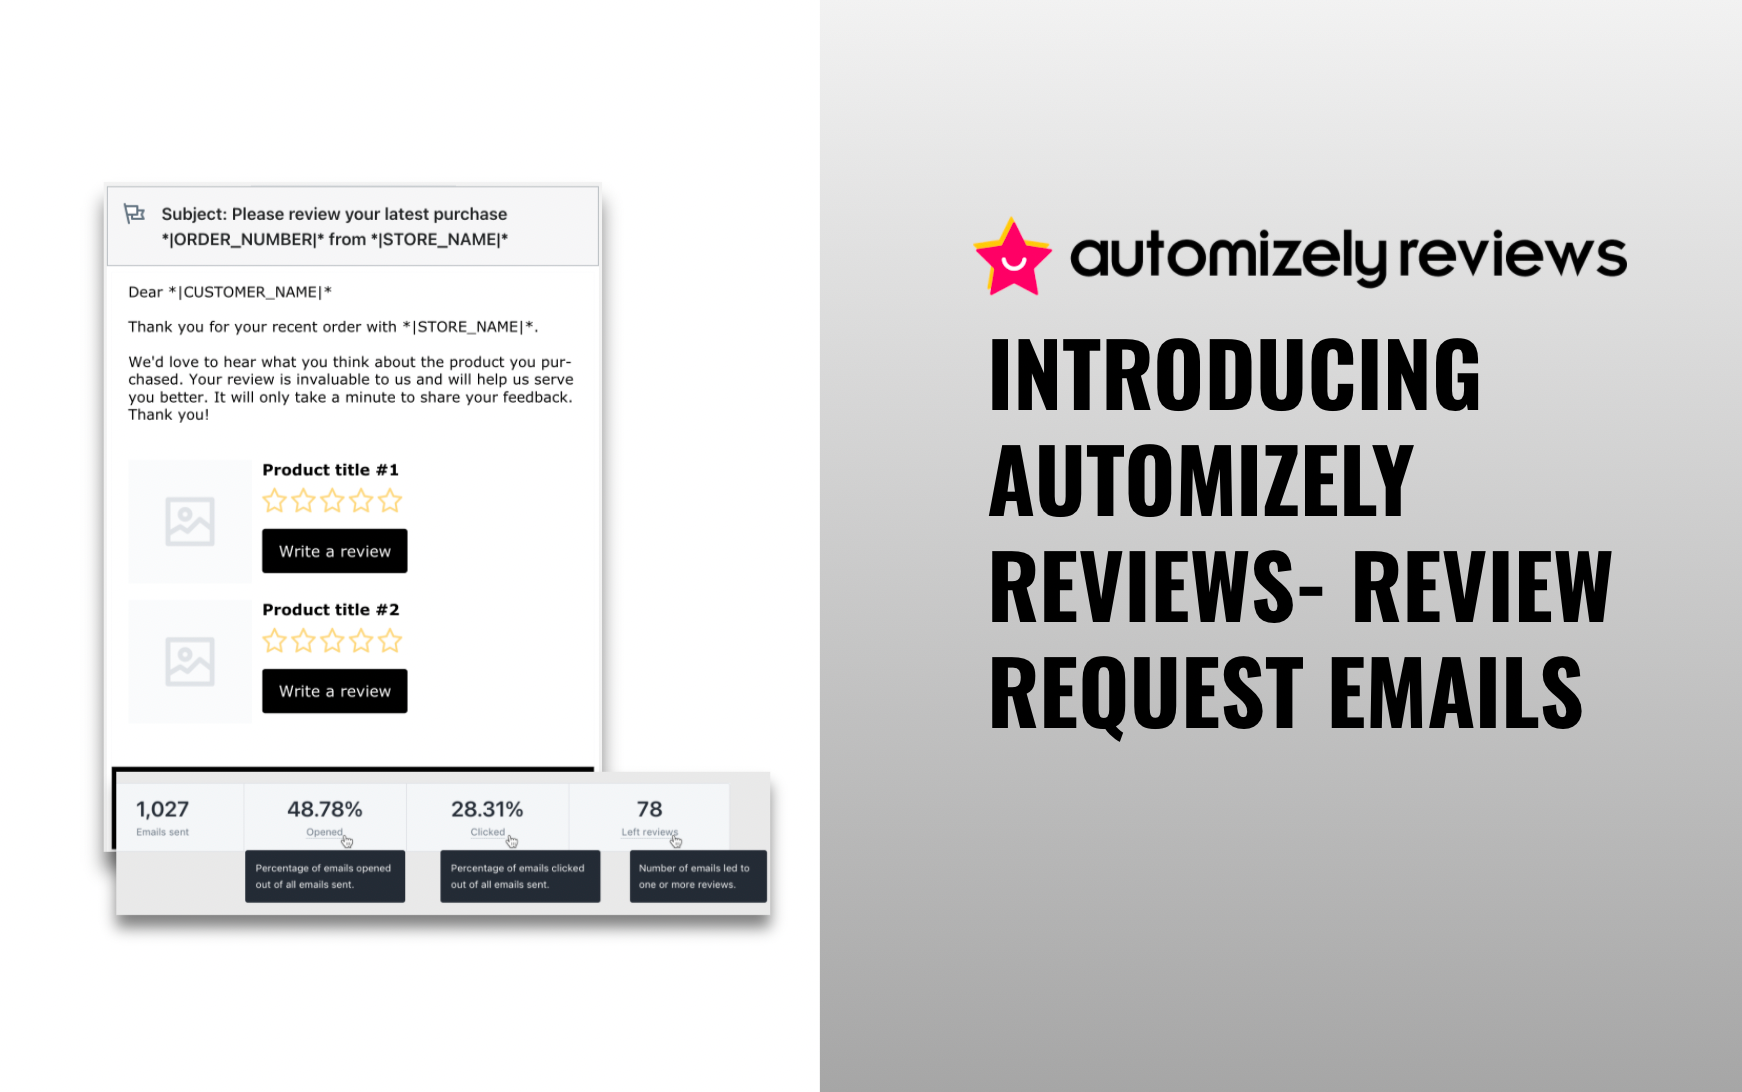 Earn more positive reviews with Automizely Reviews - Review request emails